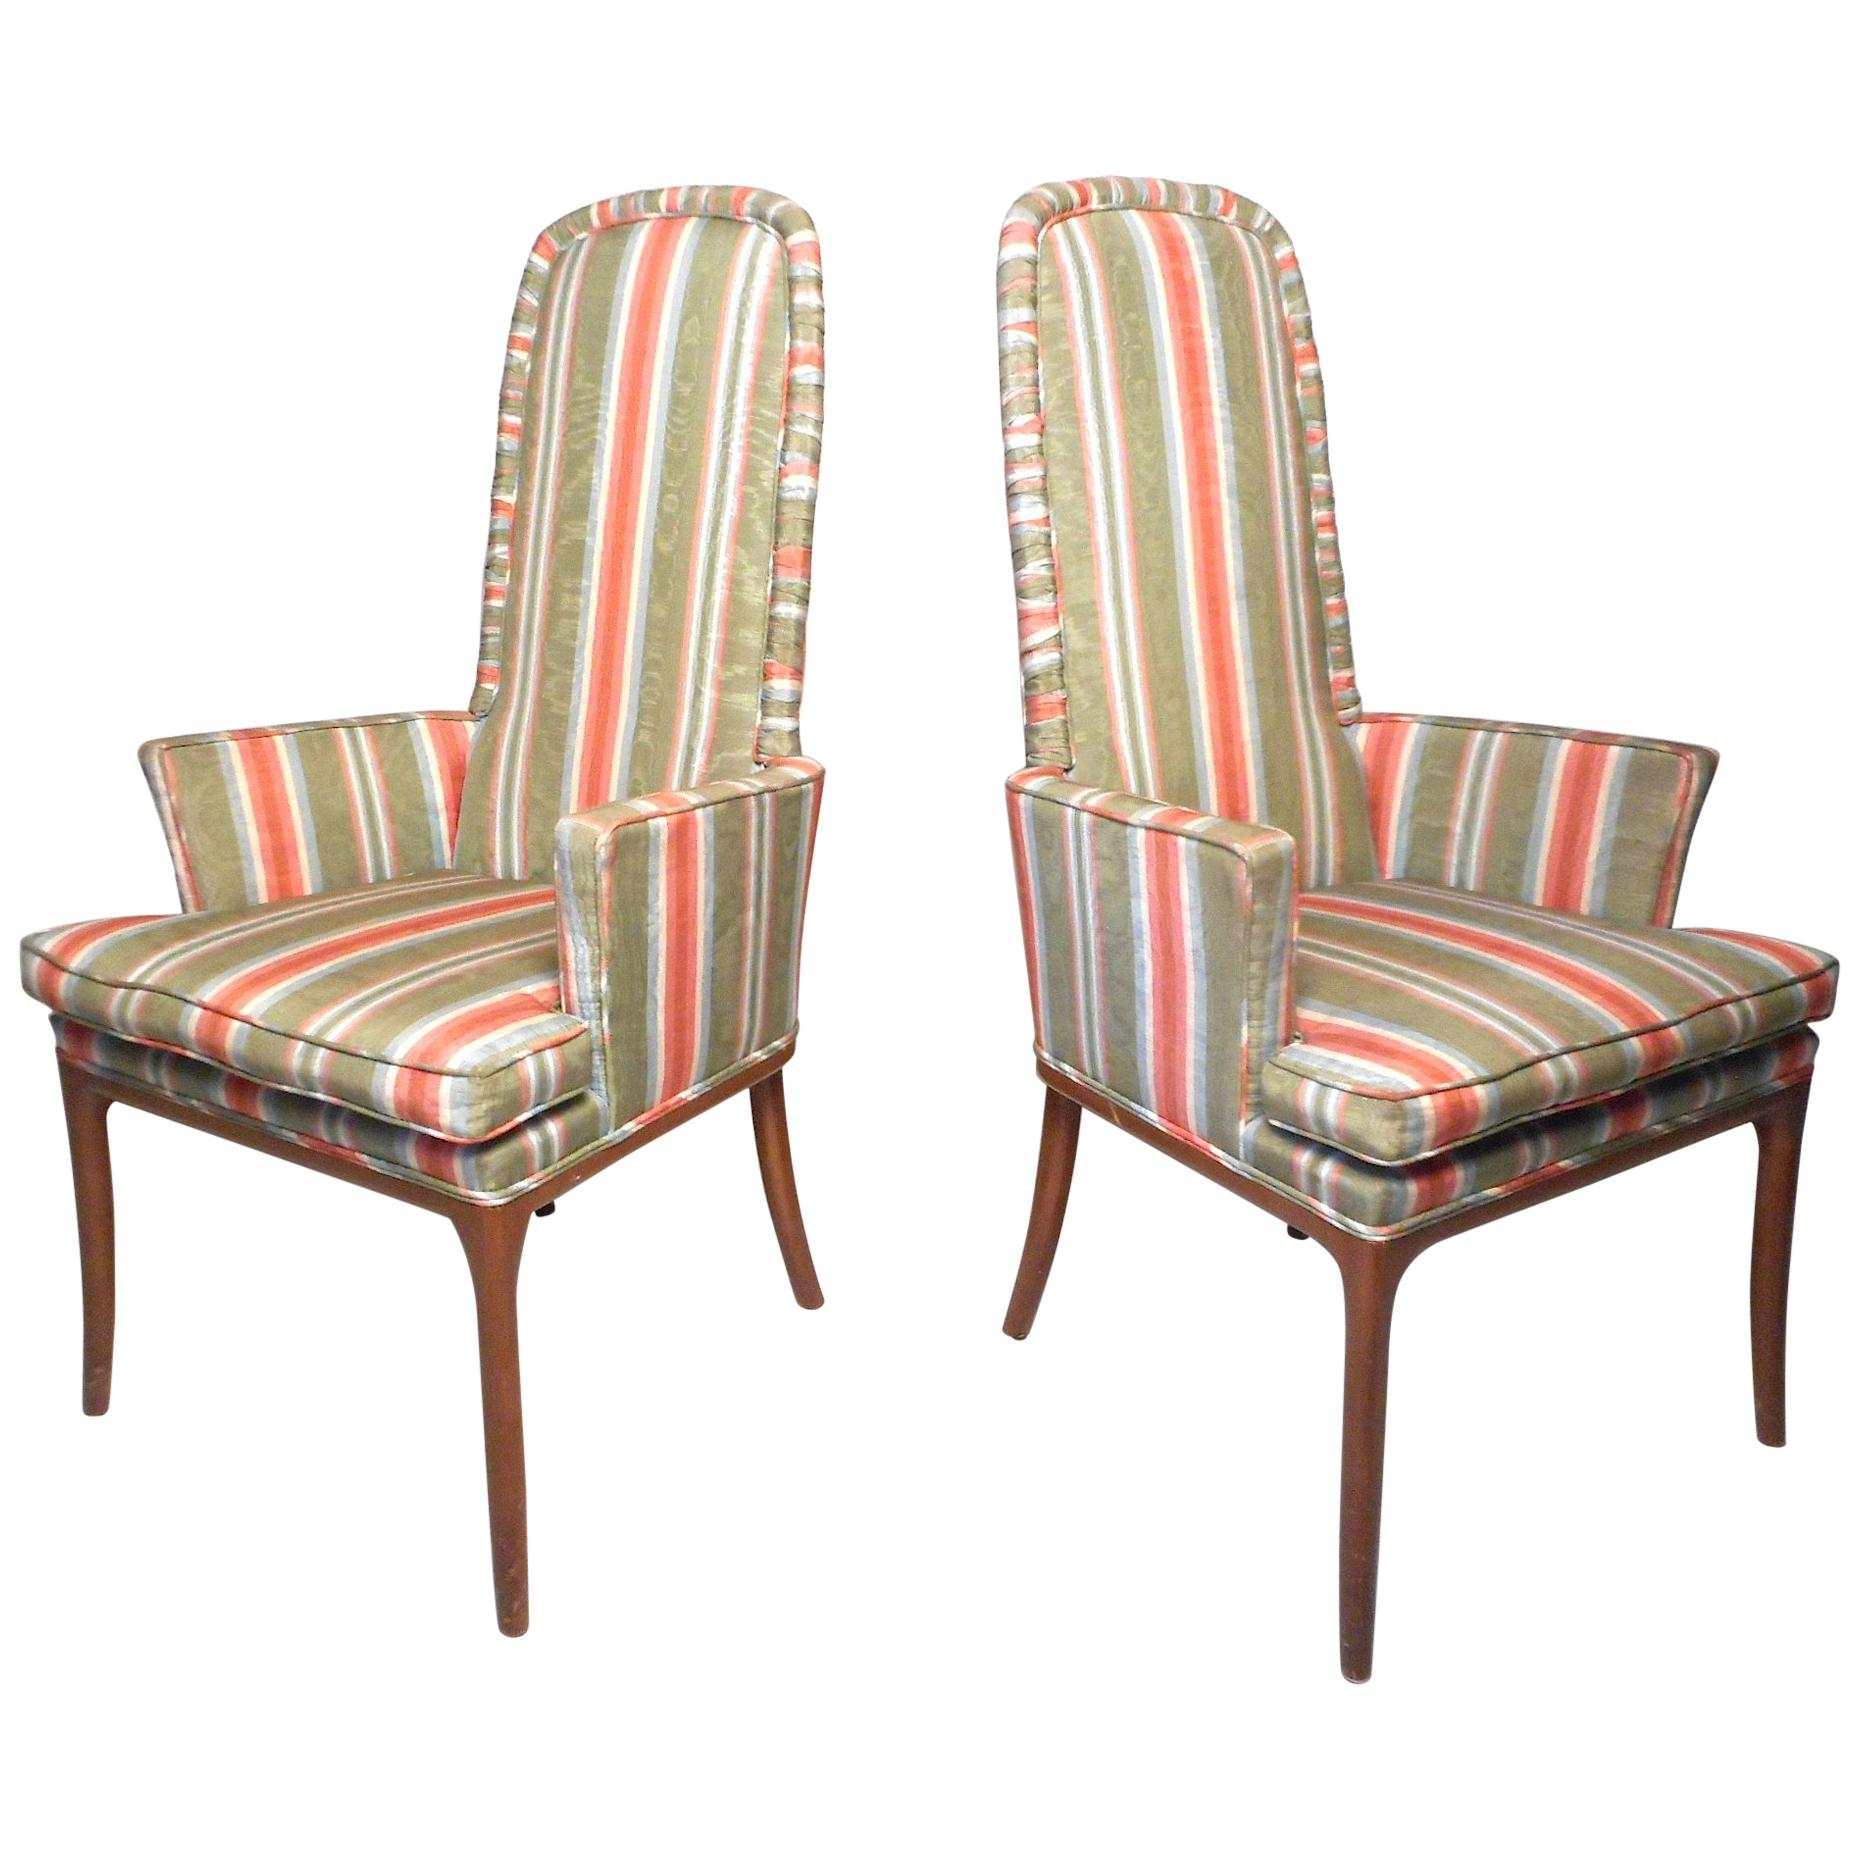 Pair of Midcentury High-Back Upholstered Chairs